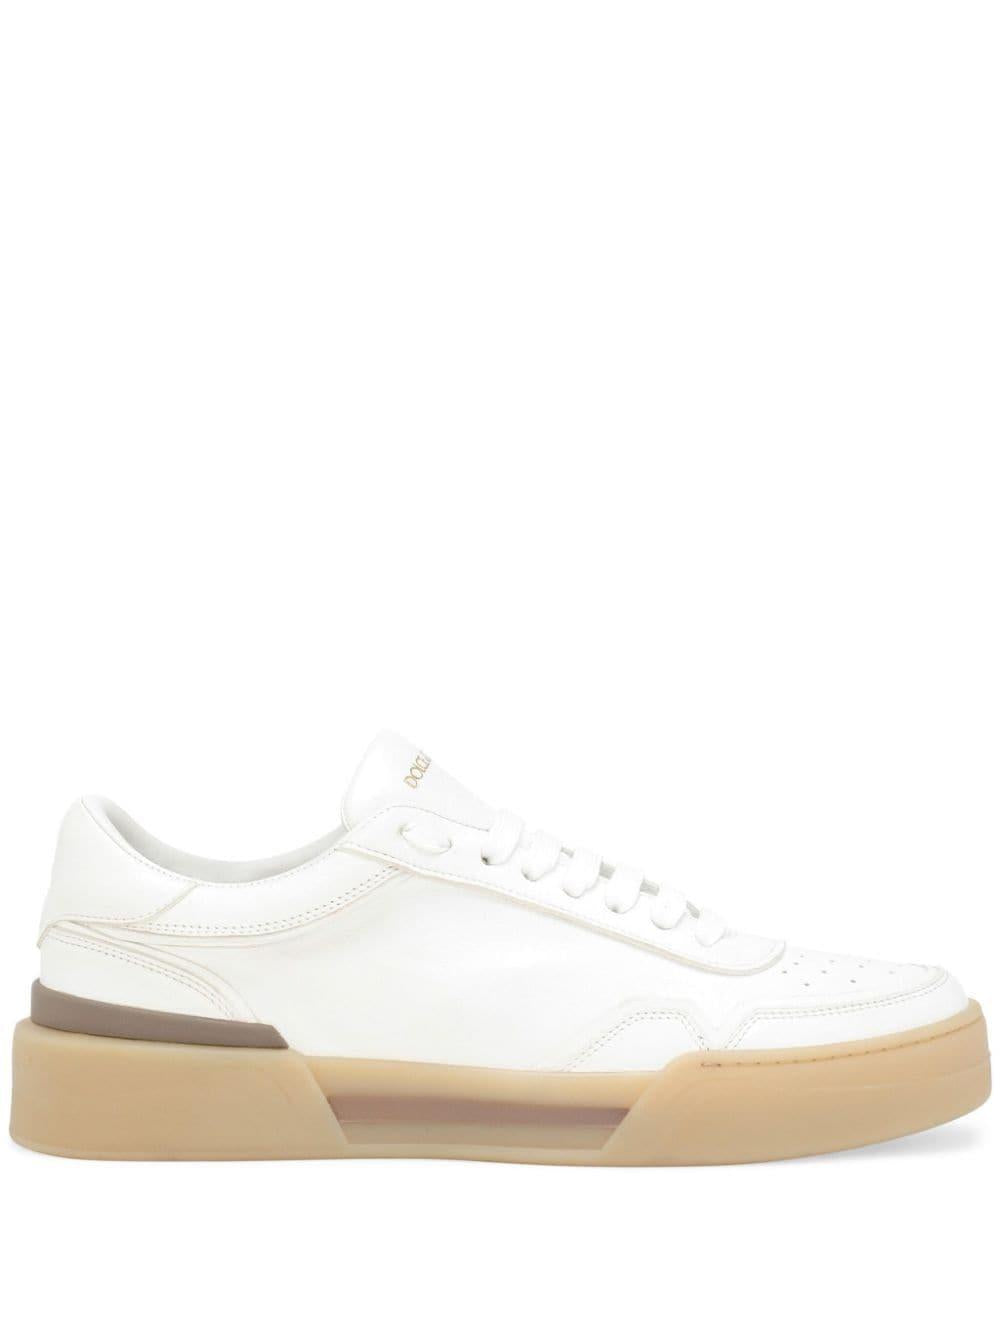 DOLCE & GABBANA NEW ROME LEATHER Sneaker